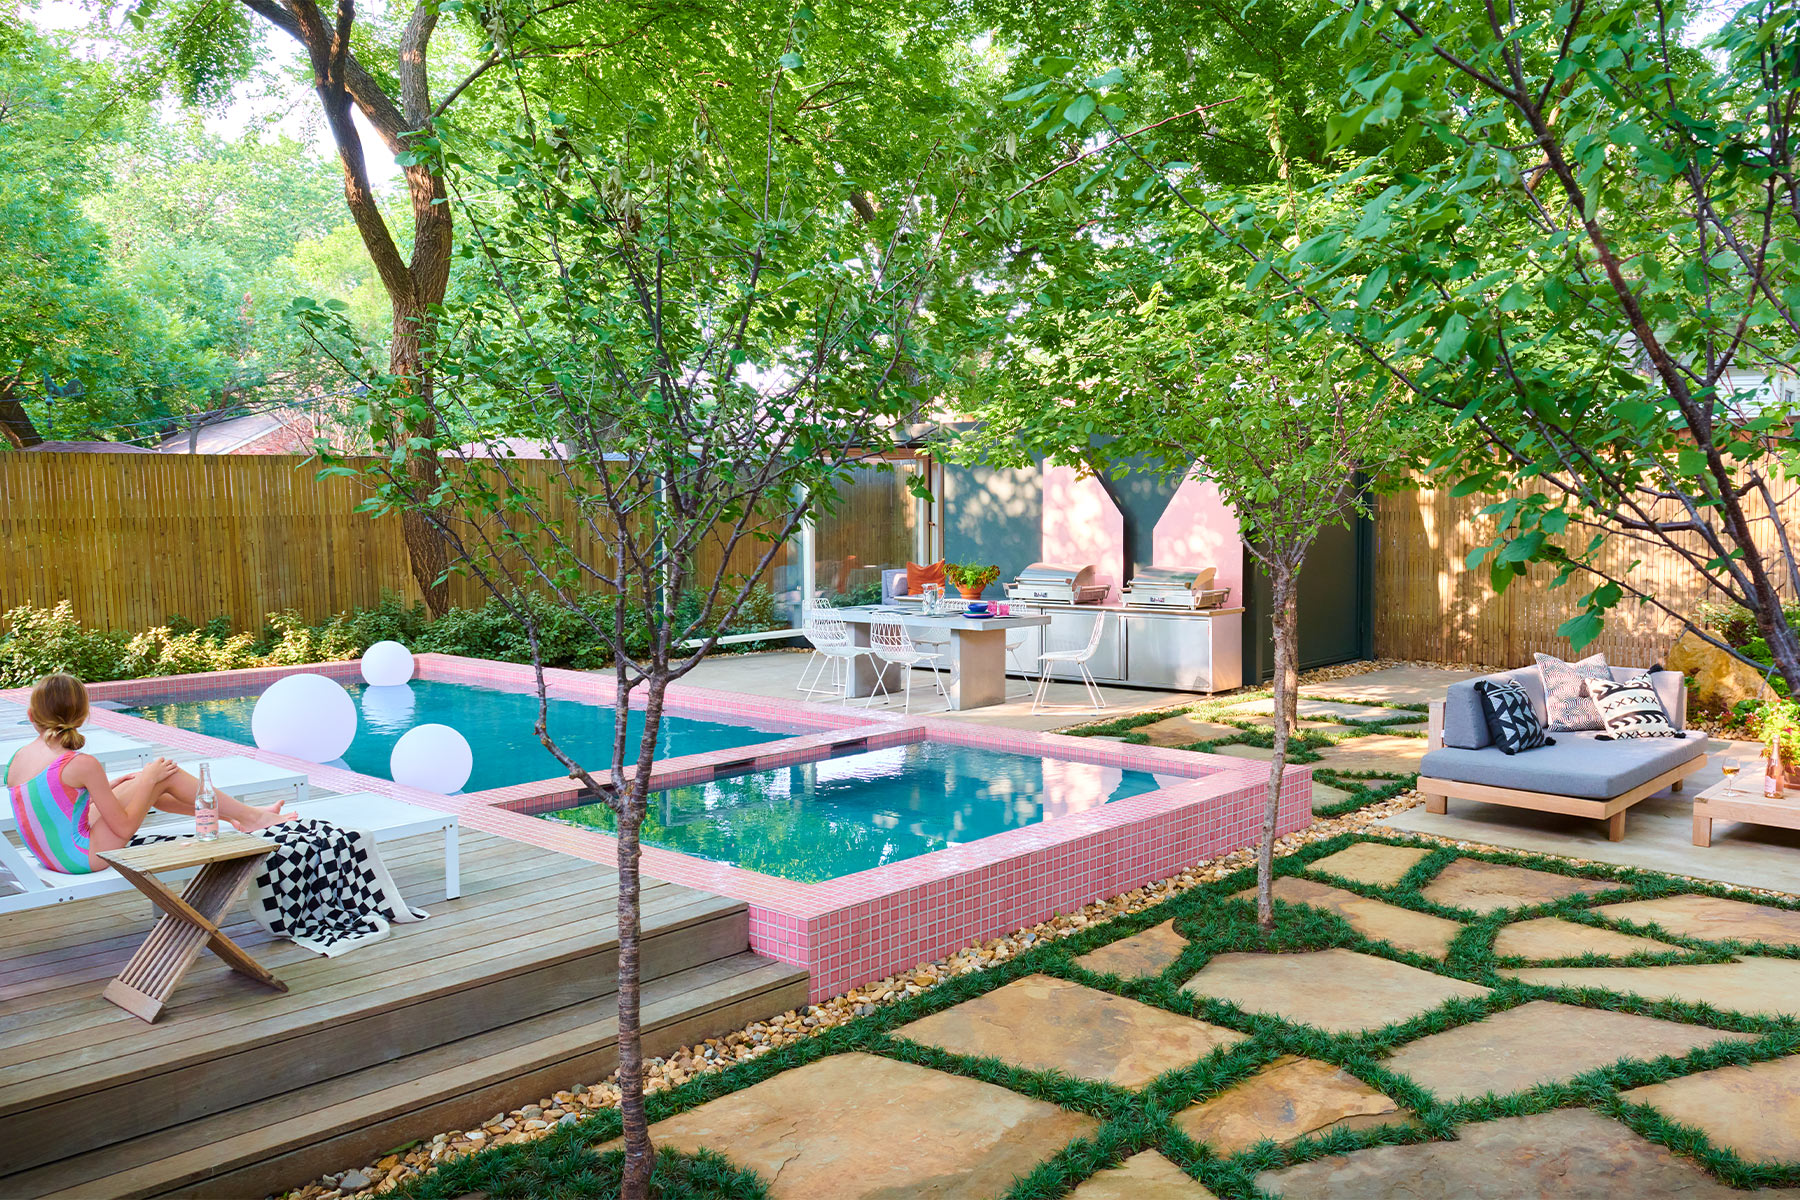 Sit Back and Relax in This 'Pretty in Pink' Backyard - D Magazine